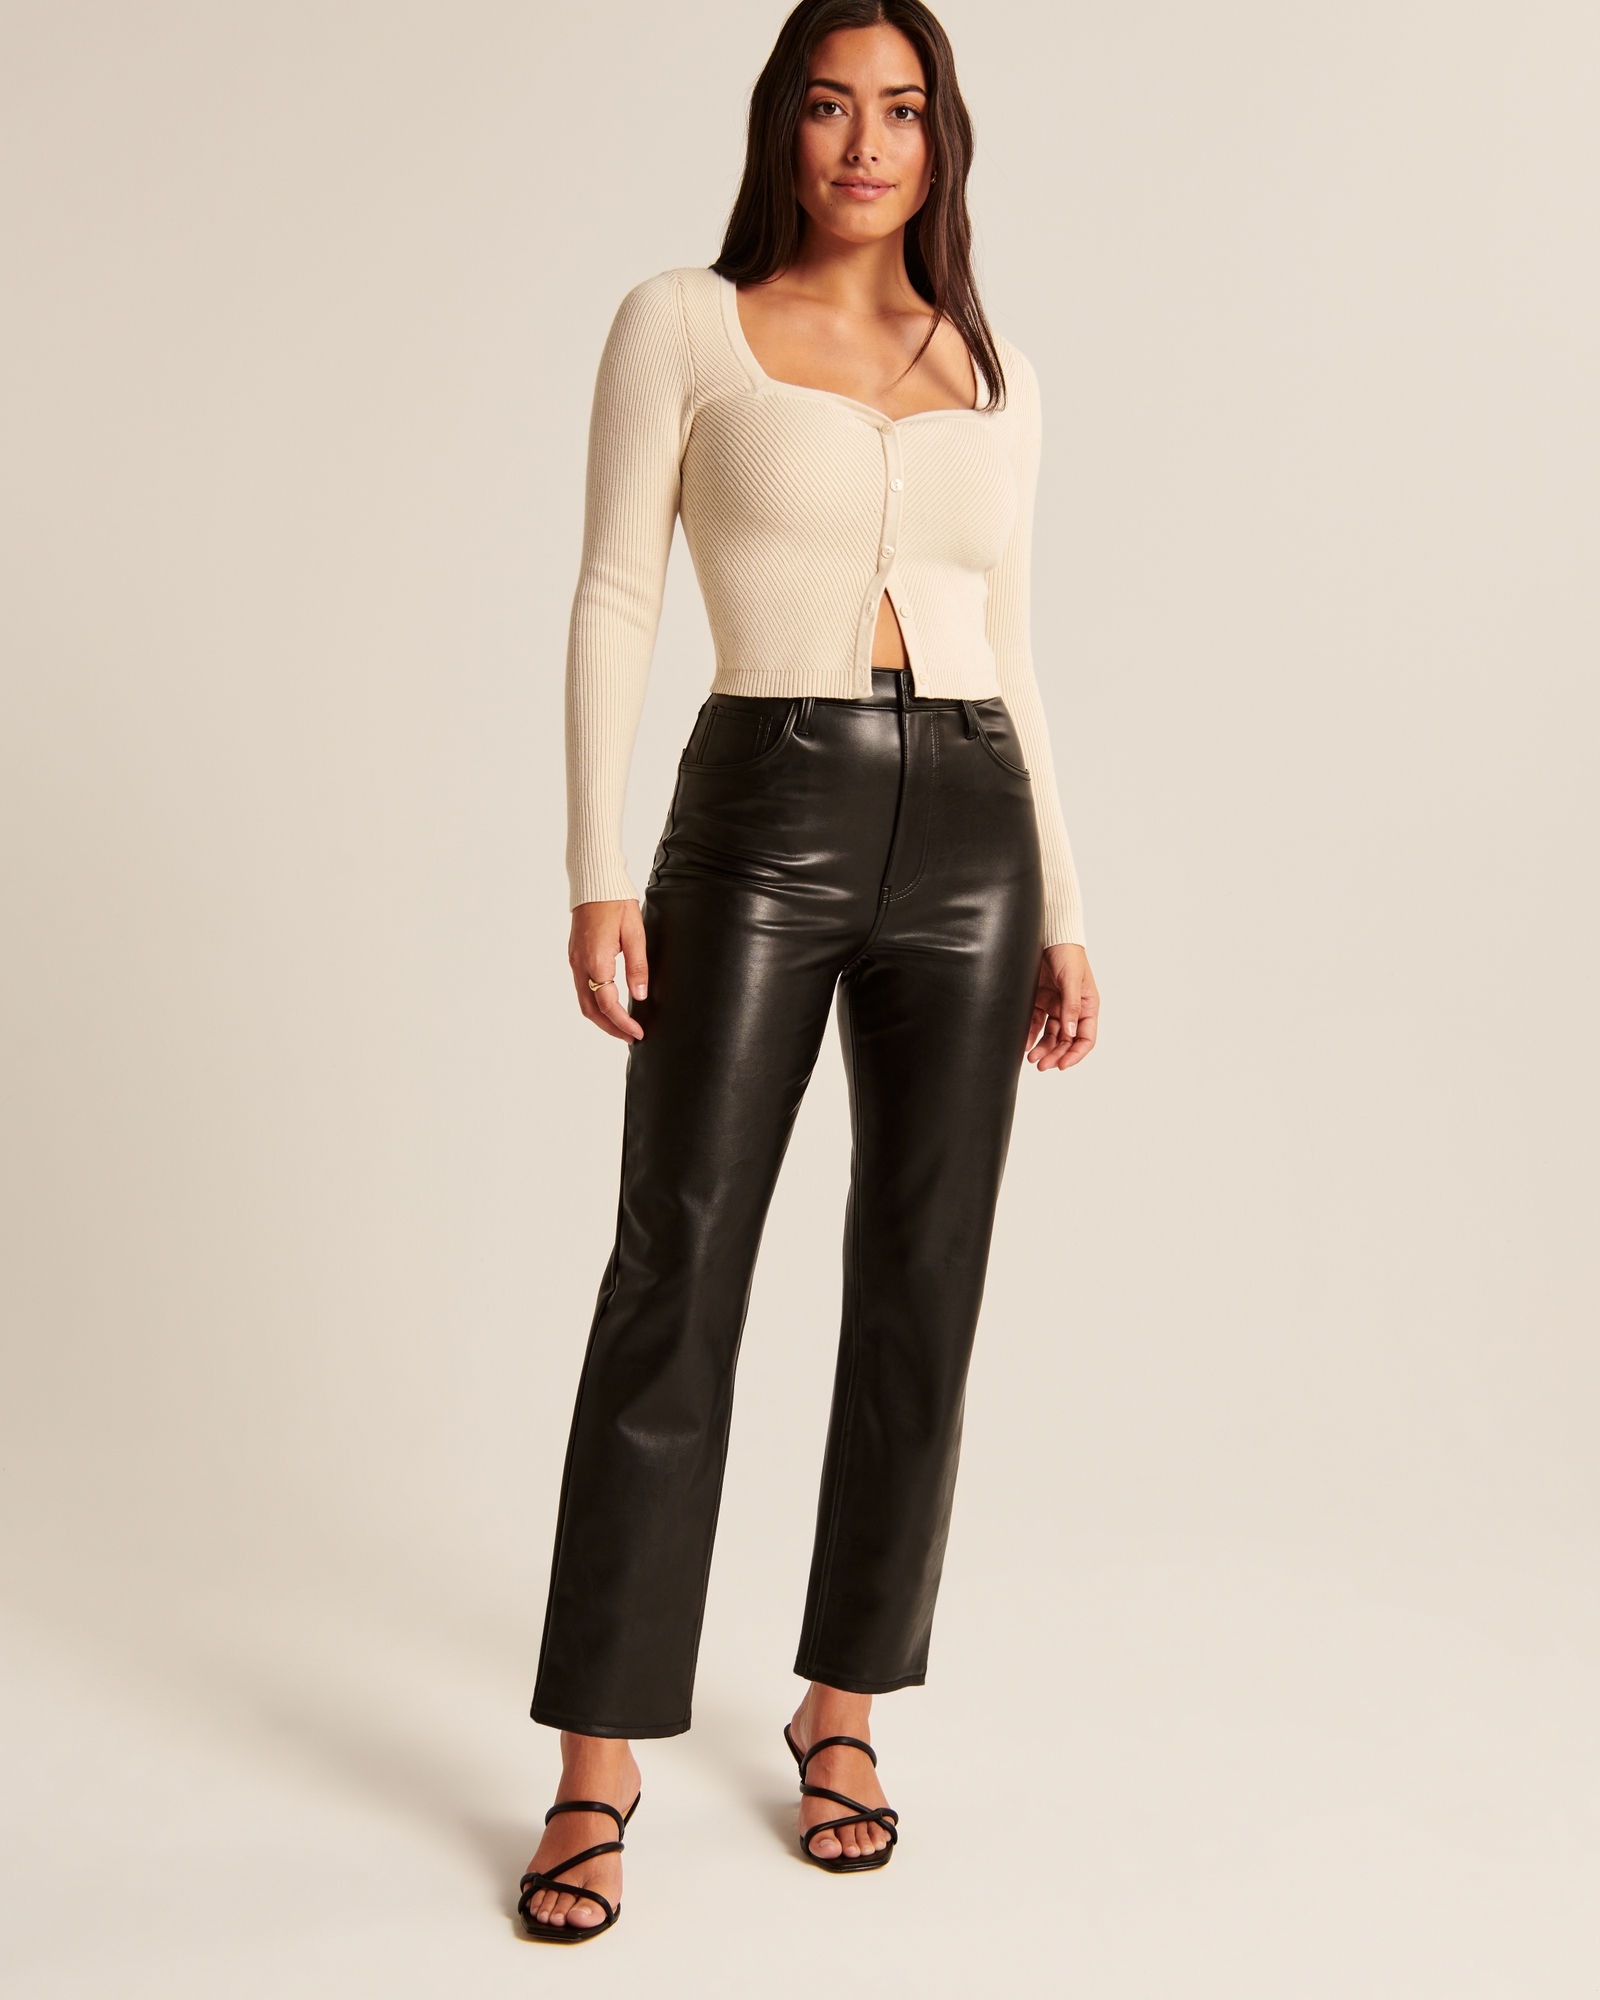 Women's Curve Love Vegan Leather Ankle Straight Pant, Women's Bottoms